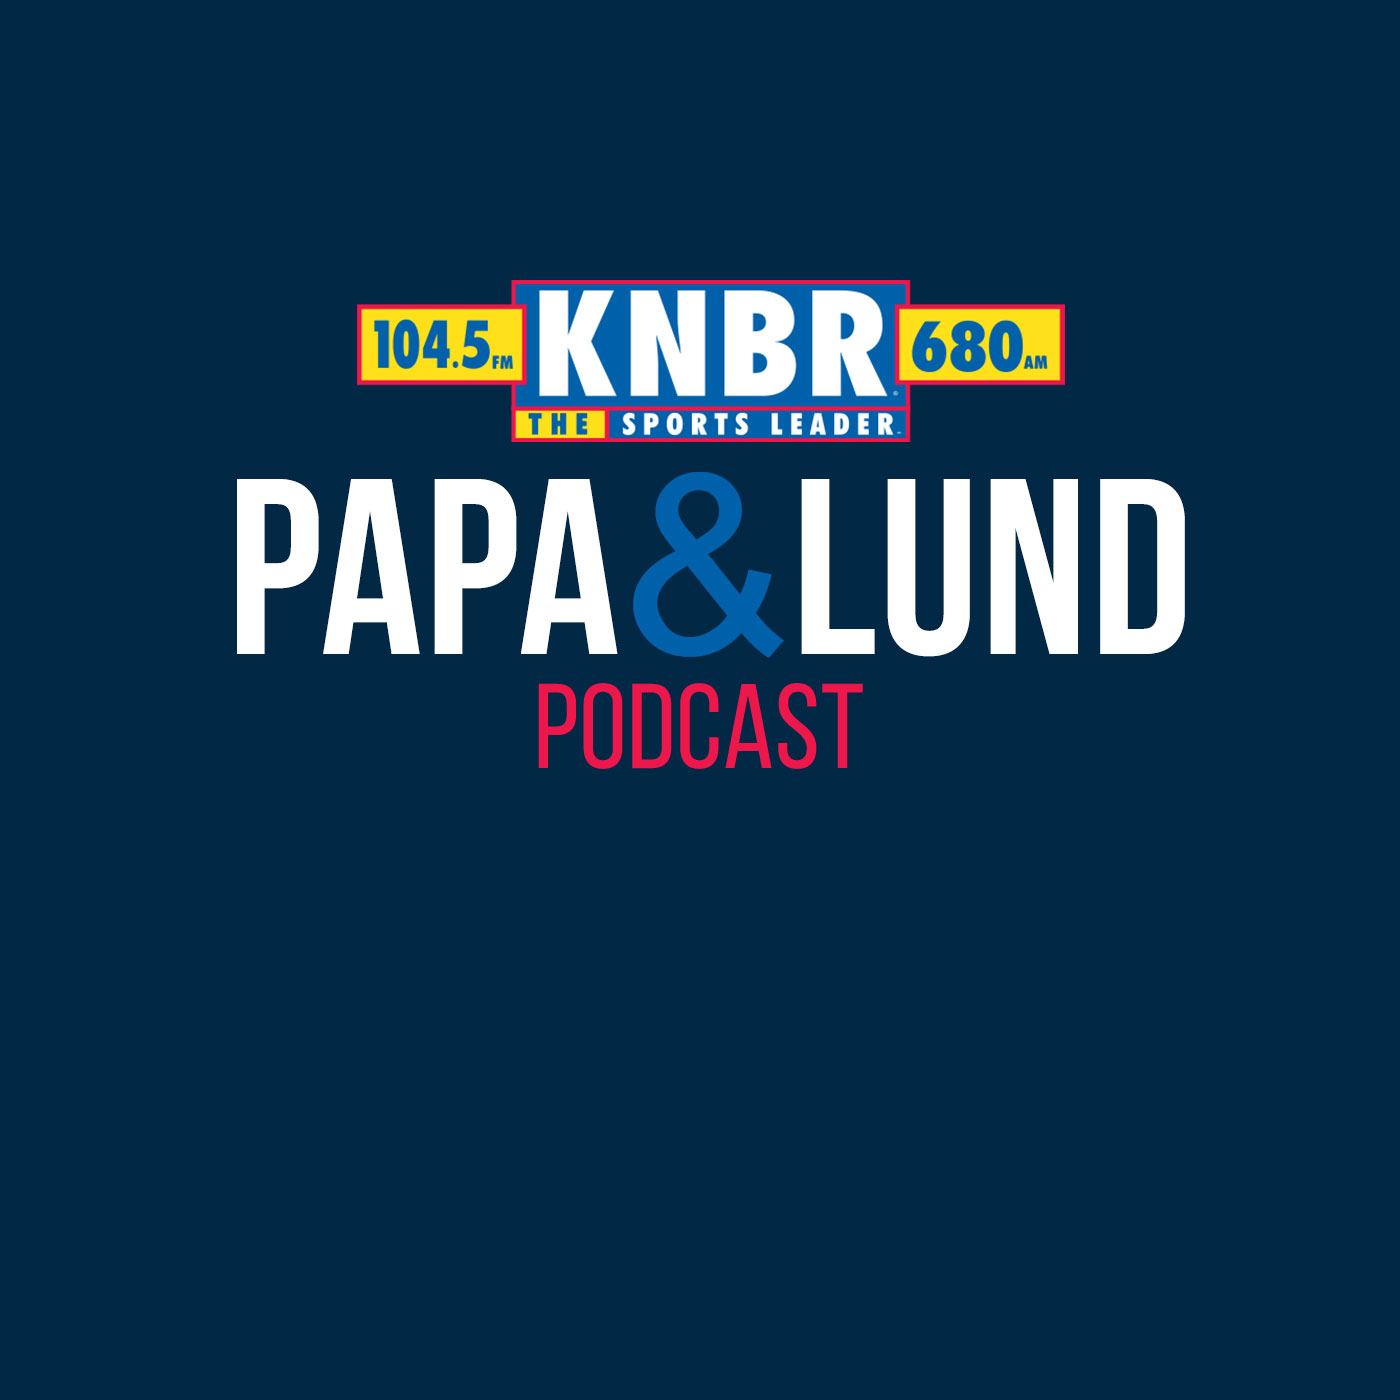 5-24 Randy Winn joins Papa & Lund to discuss what Luis Matos brings to the top of the Giants Lineup